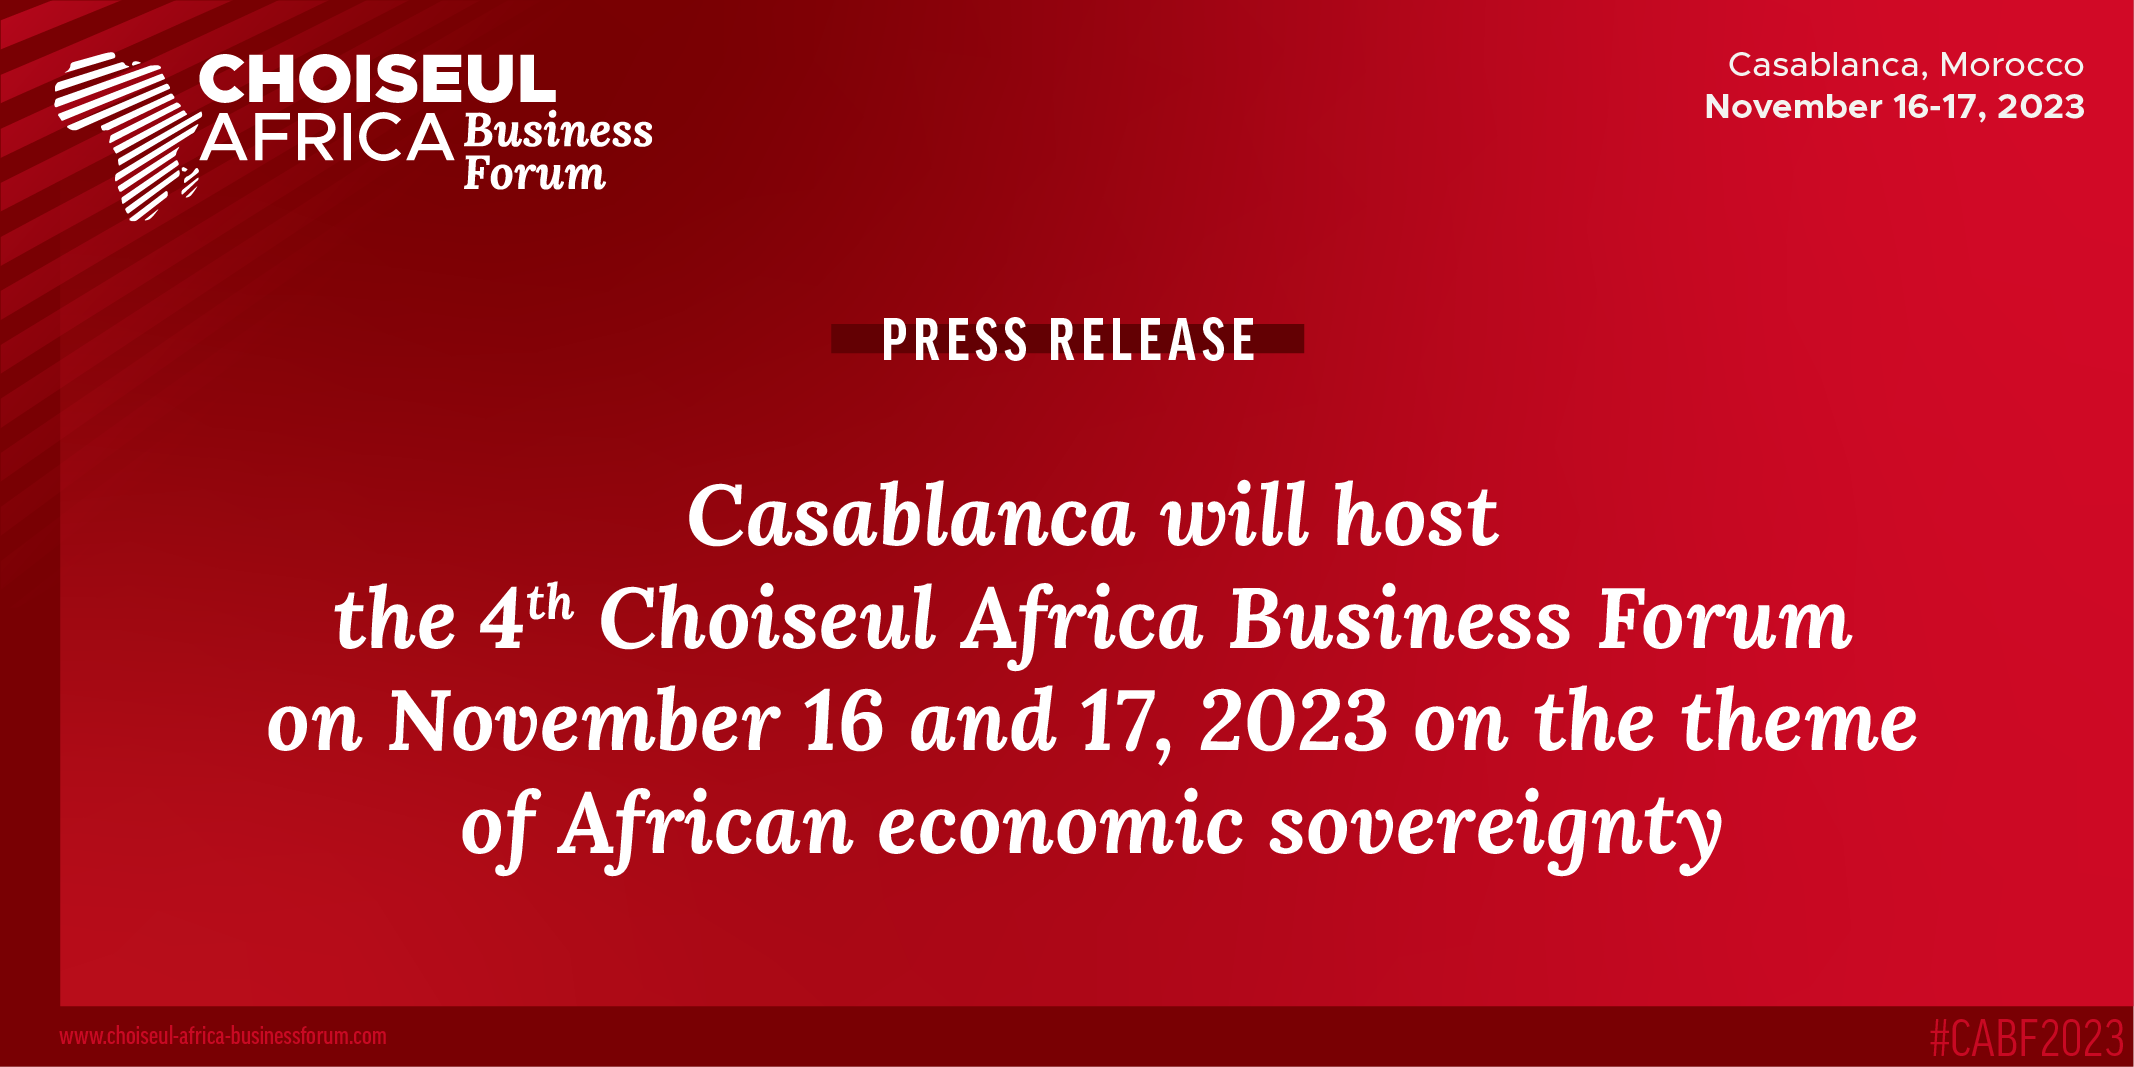 Press Release : Casablanca will host the 4th Choiseul Africa Business Forum on November 16 and 17, 2023 on the theme of African economic sovereignty